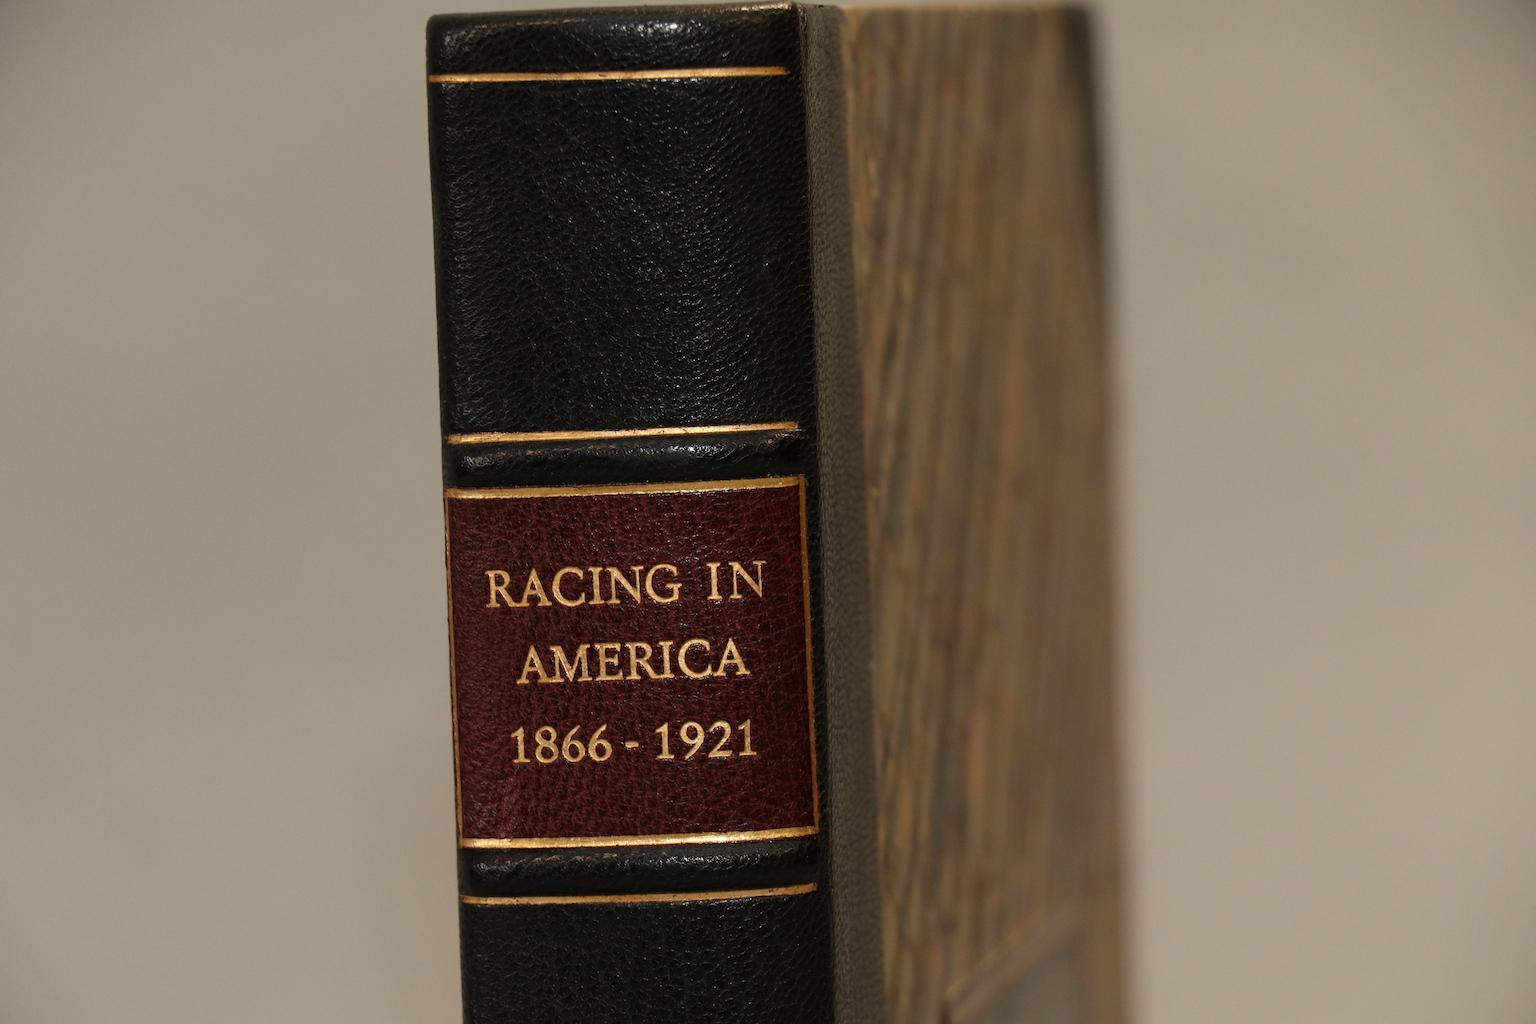 Leatherbound. One volume. Folio. Bound in three quarter black morocco with marbled boards, raised bands, with gilt panels. Profusely illustrated throughout. Privately printed for the Jockey Club. Very good. Published in New York by The Scribner